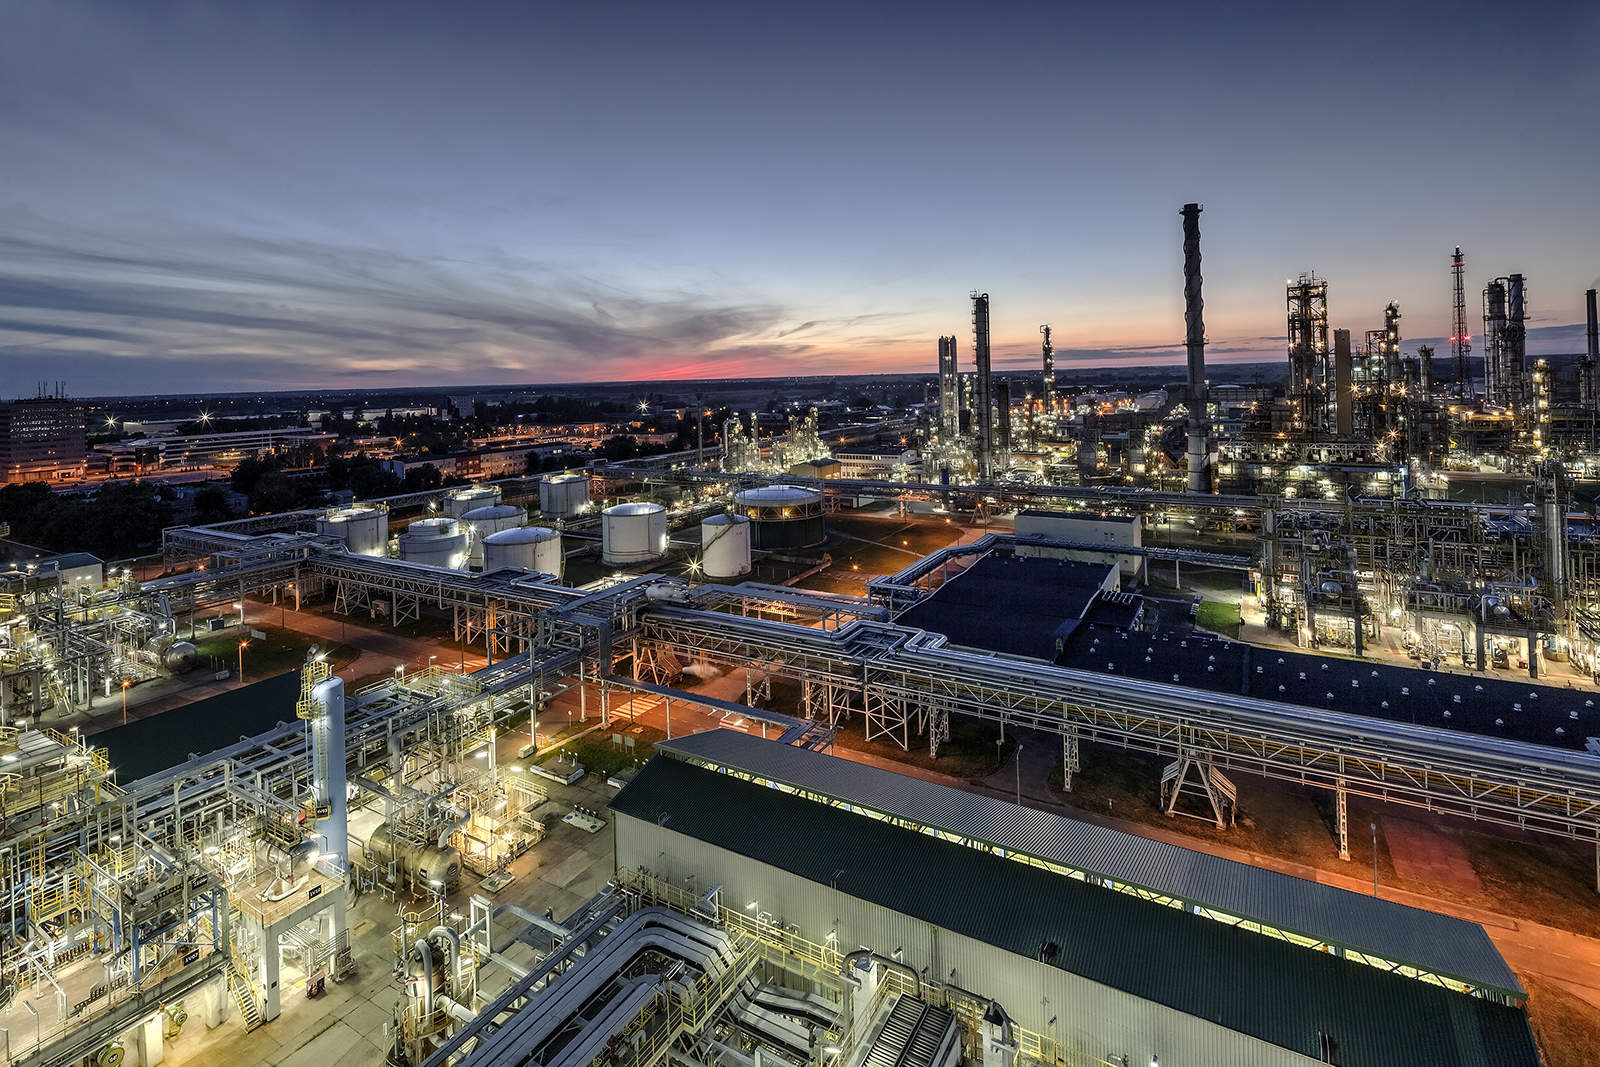 PKN Orlen plans to invest $2.2bn to boost petrochemical business in Poland